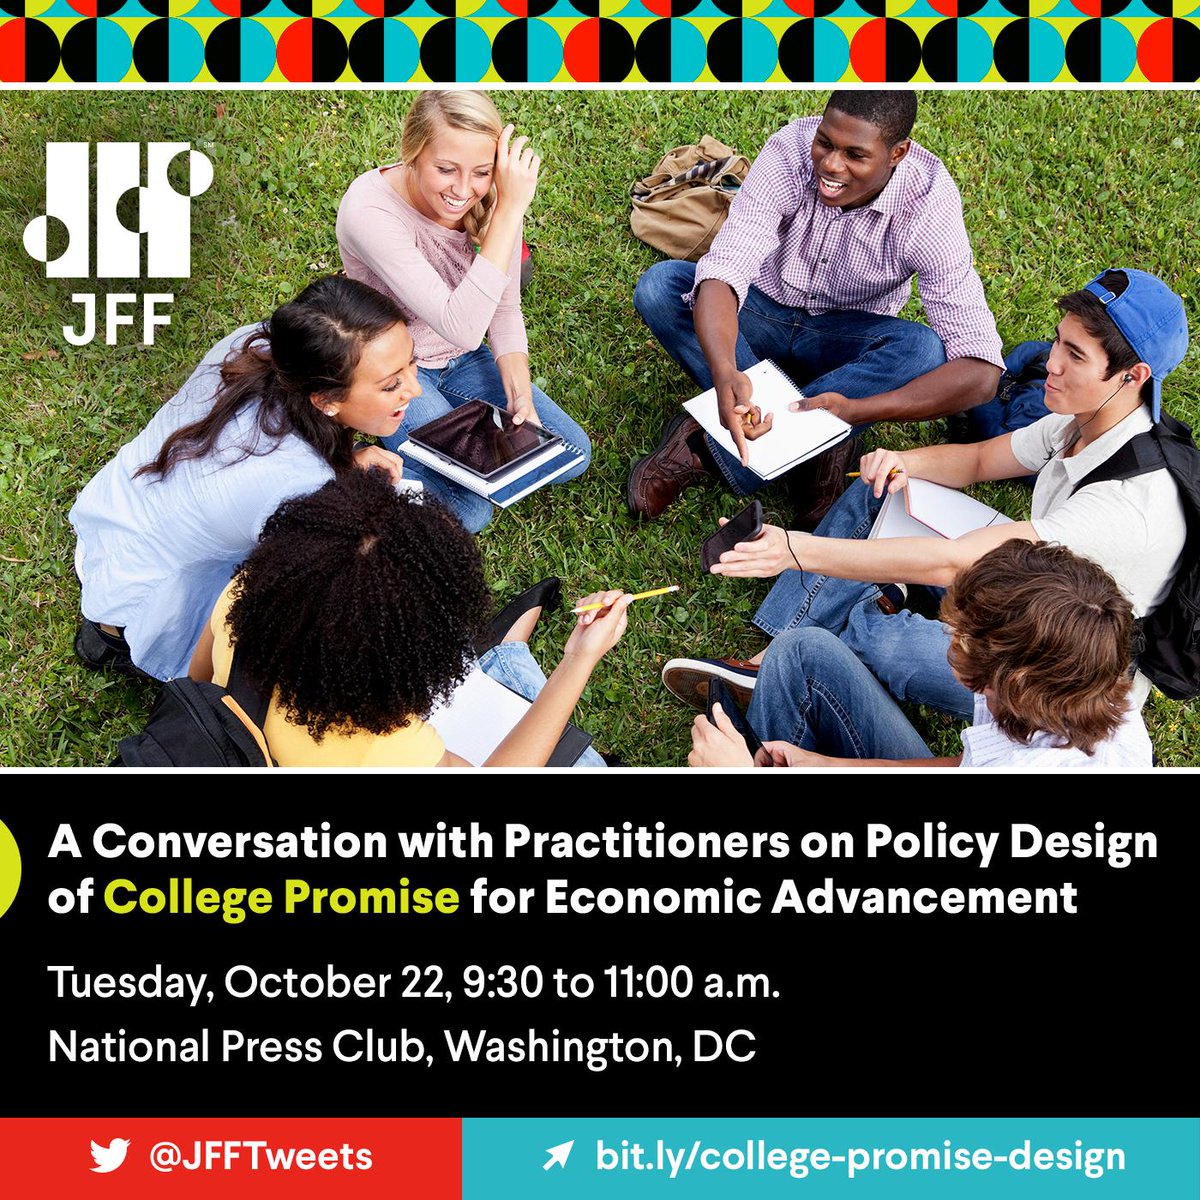 As a response to the nation's college affordability and #SkillsDev crisis, #CollegePromise programs are gaining popularity, but how can these programs be designed to ensure #StudentSuccess? Explore this topic w/ us on Oct 22. RSVP today bit.ly/college-promis… #HigherEd #EdPolicy